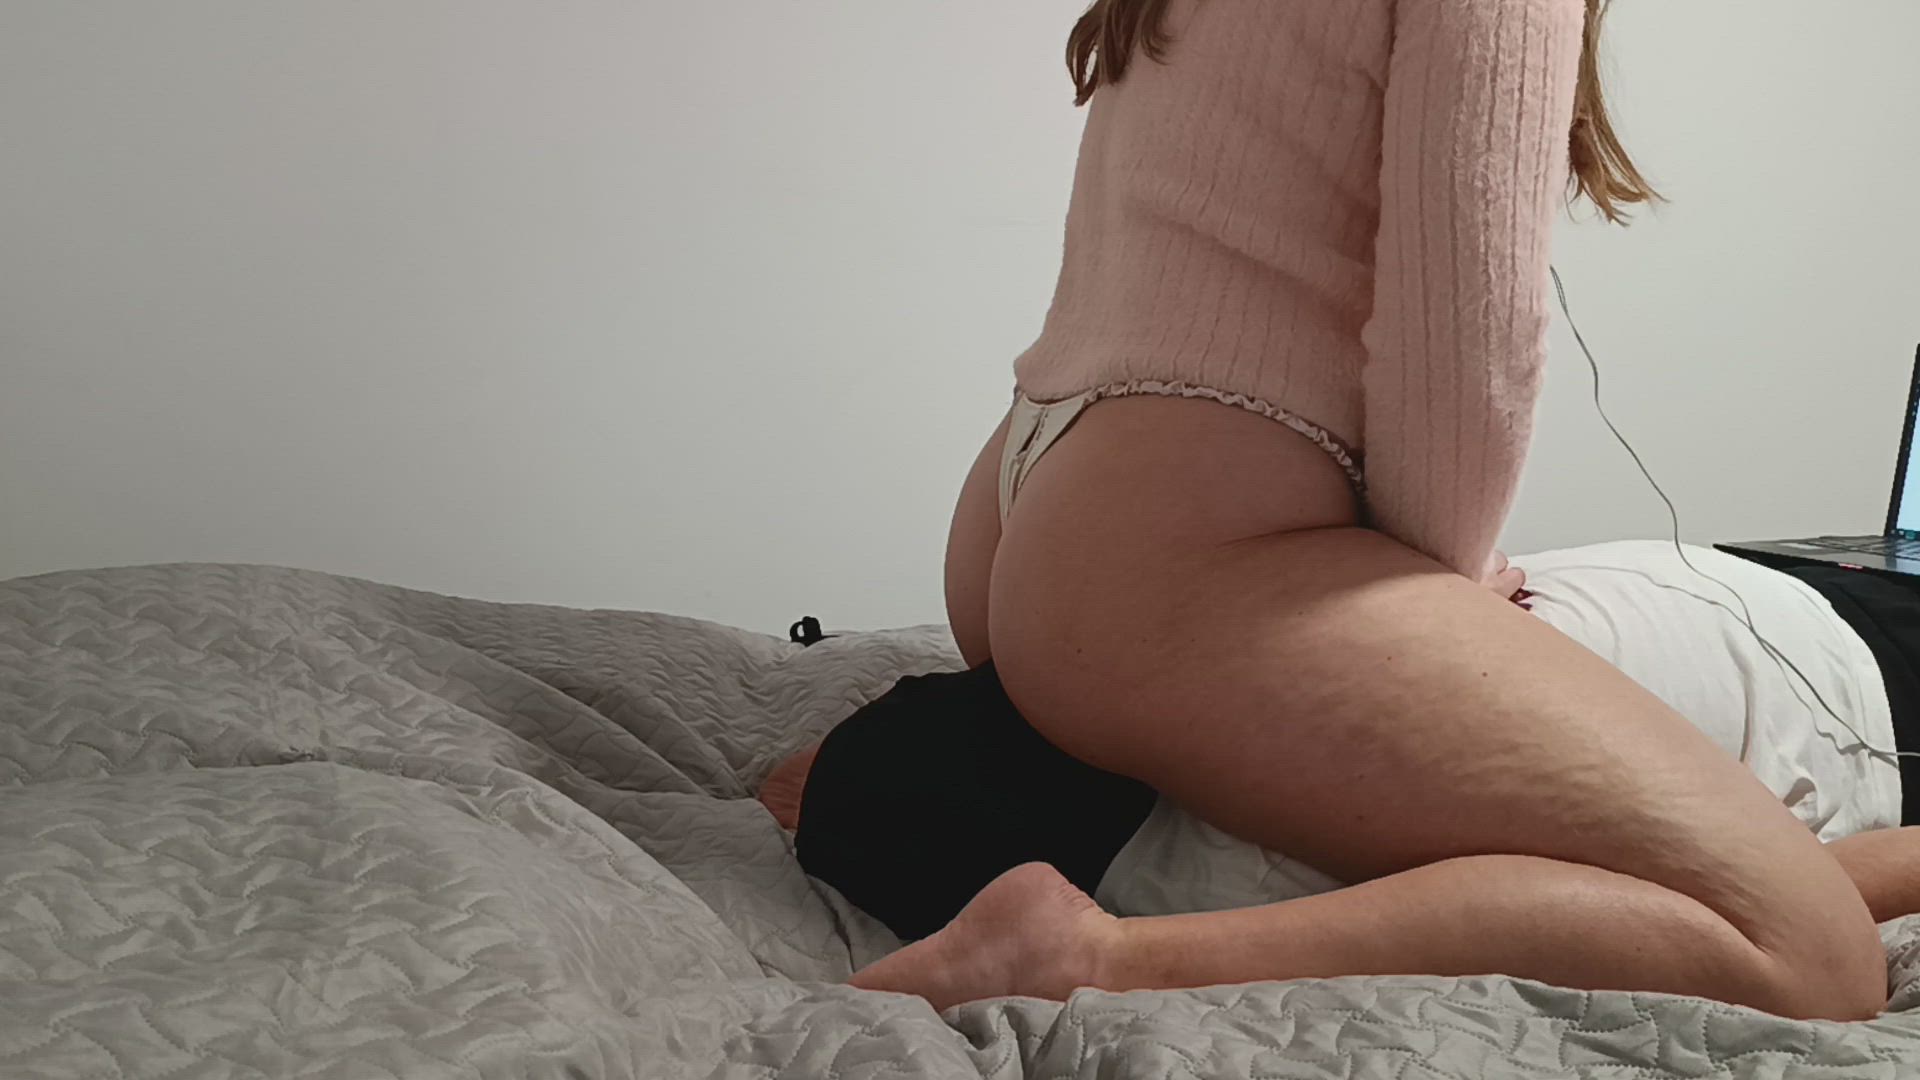 Fart porn video with onlyfans model queensylvia <strong>@itsqueensylvia</strong>